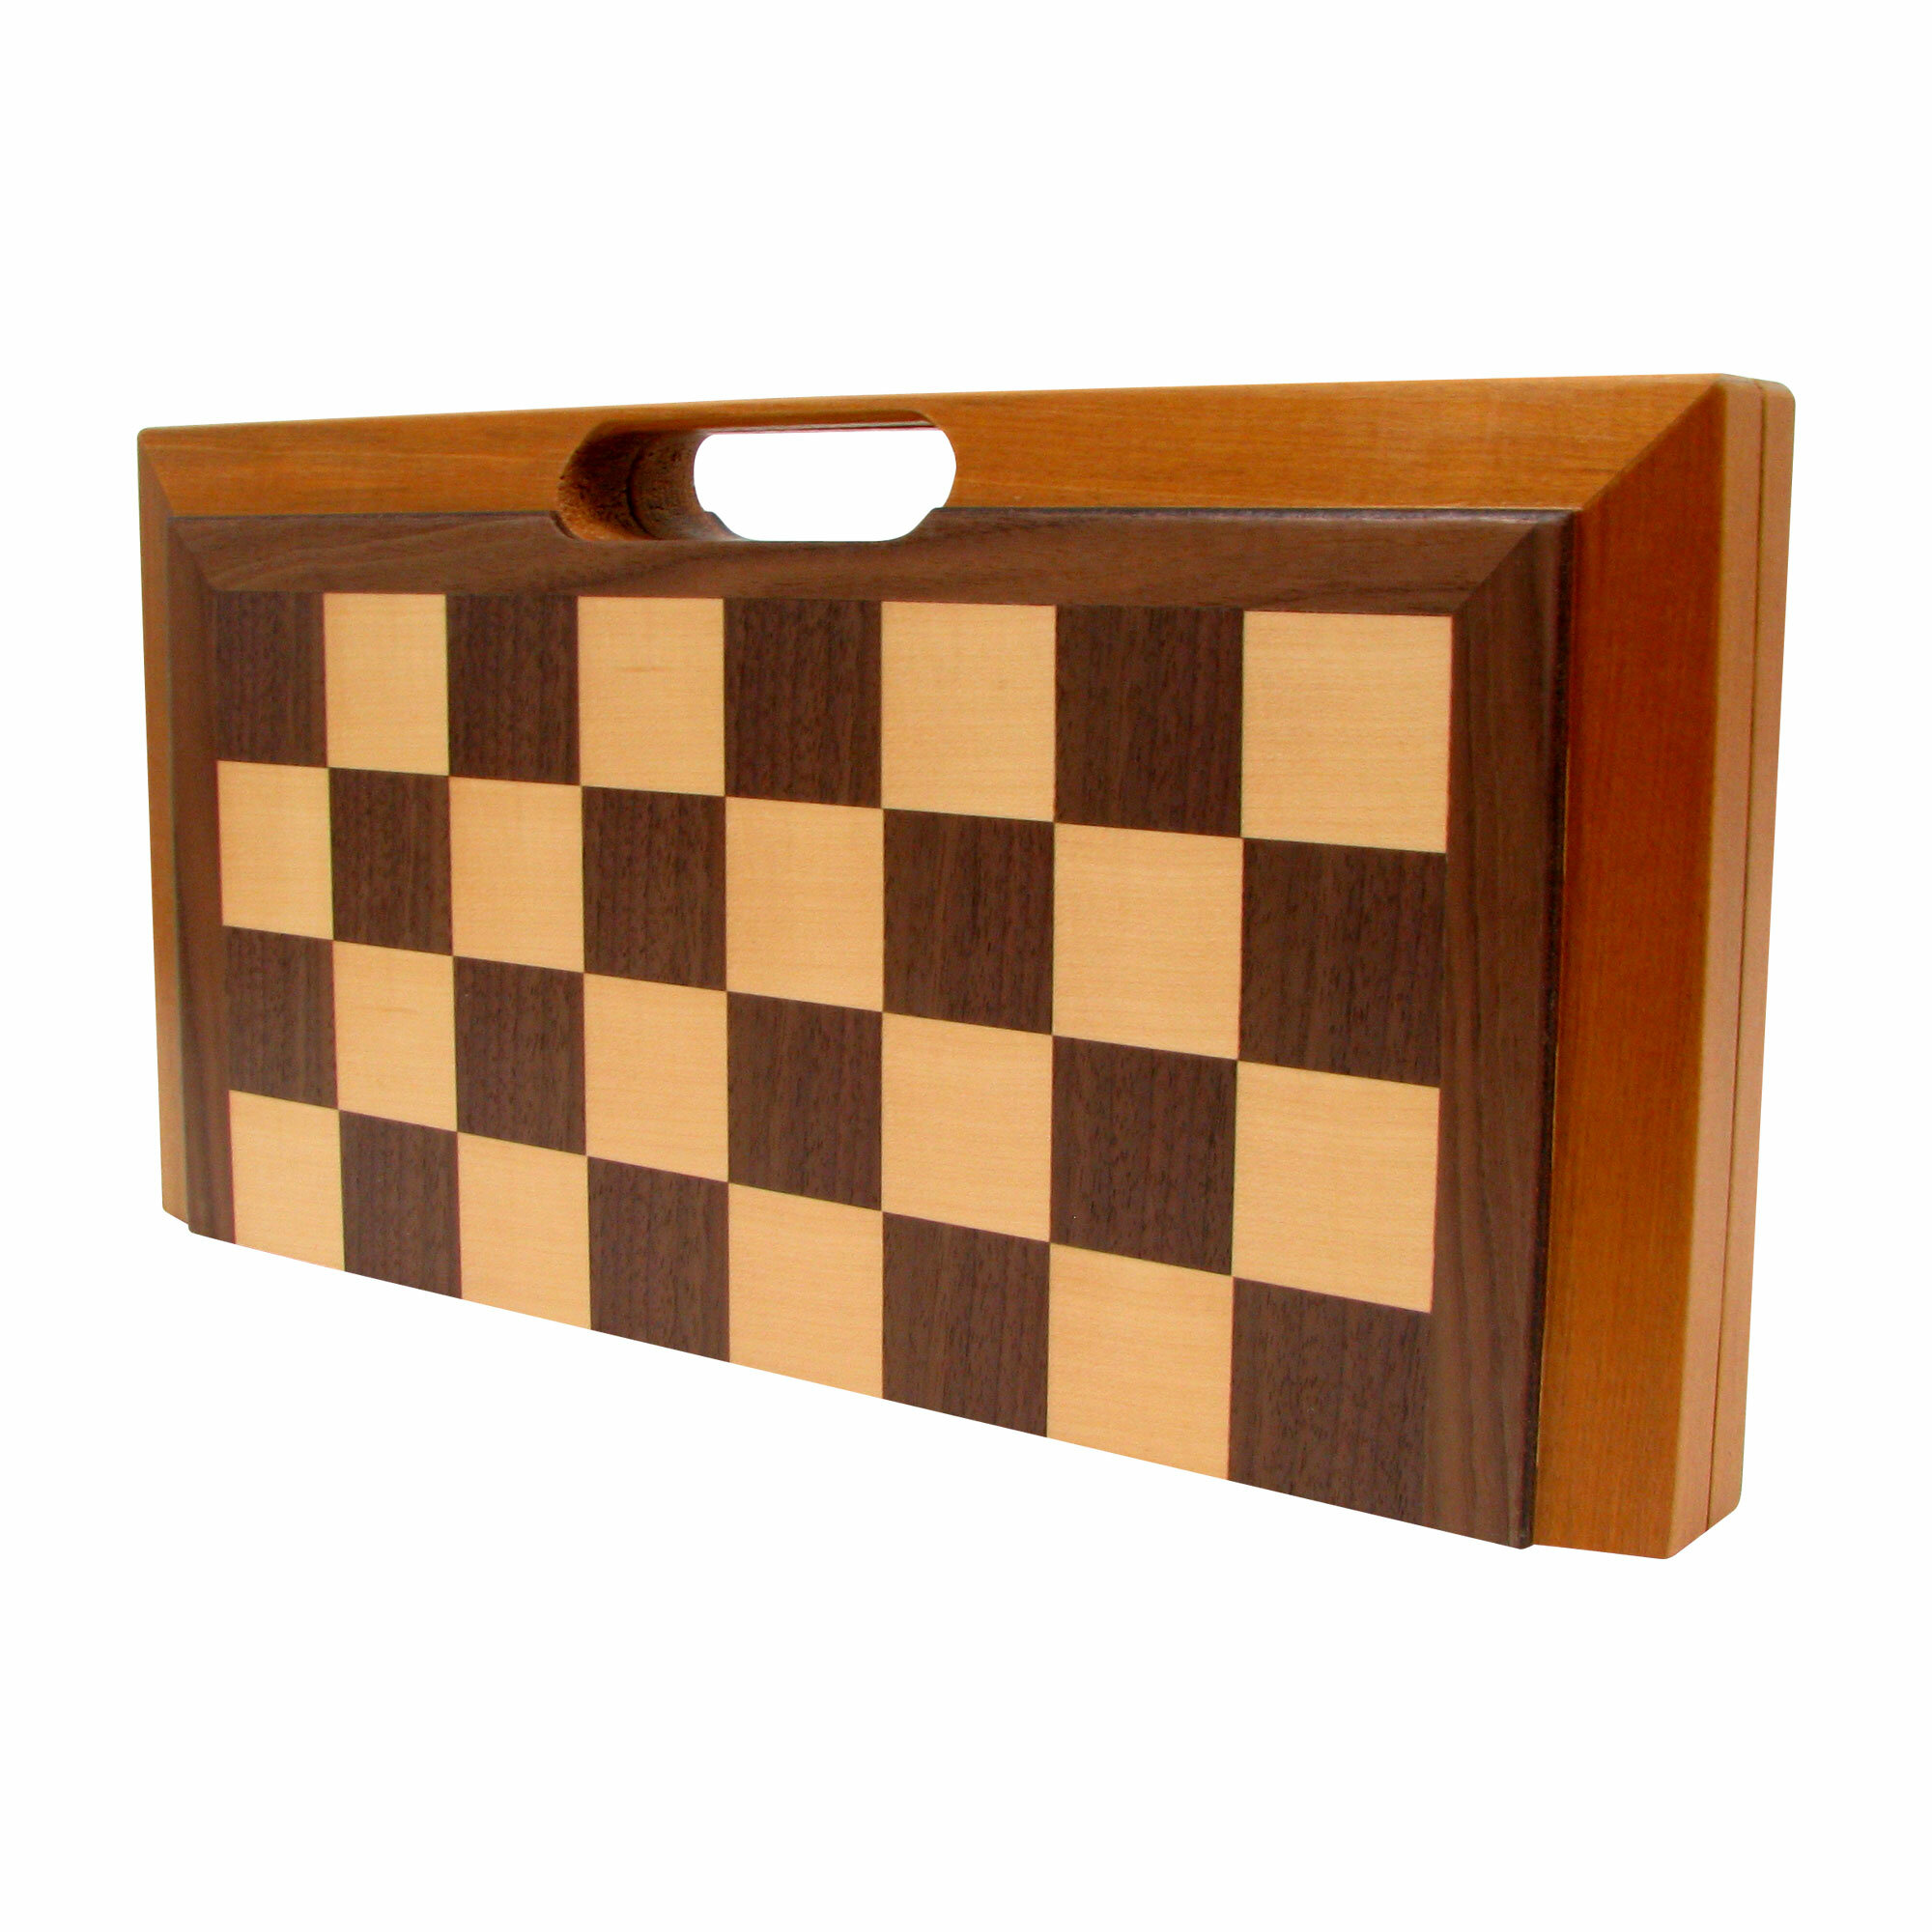 Hot 3 in 1 Wooden Chess Game Set Backgammon Checkers Folding Wooden Chessboard 